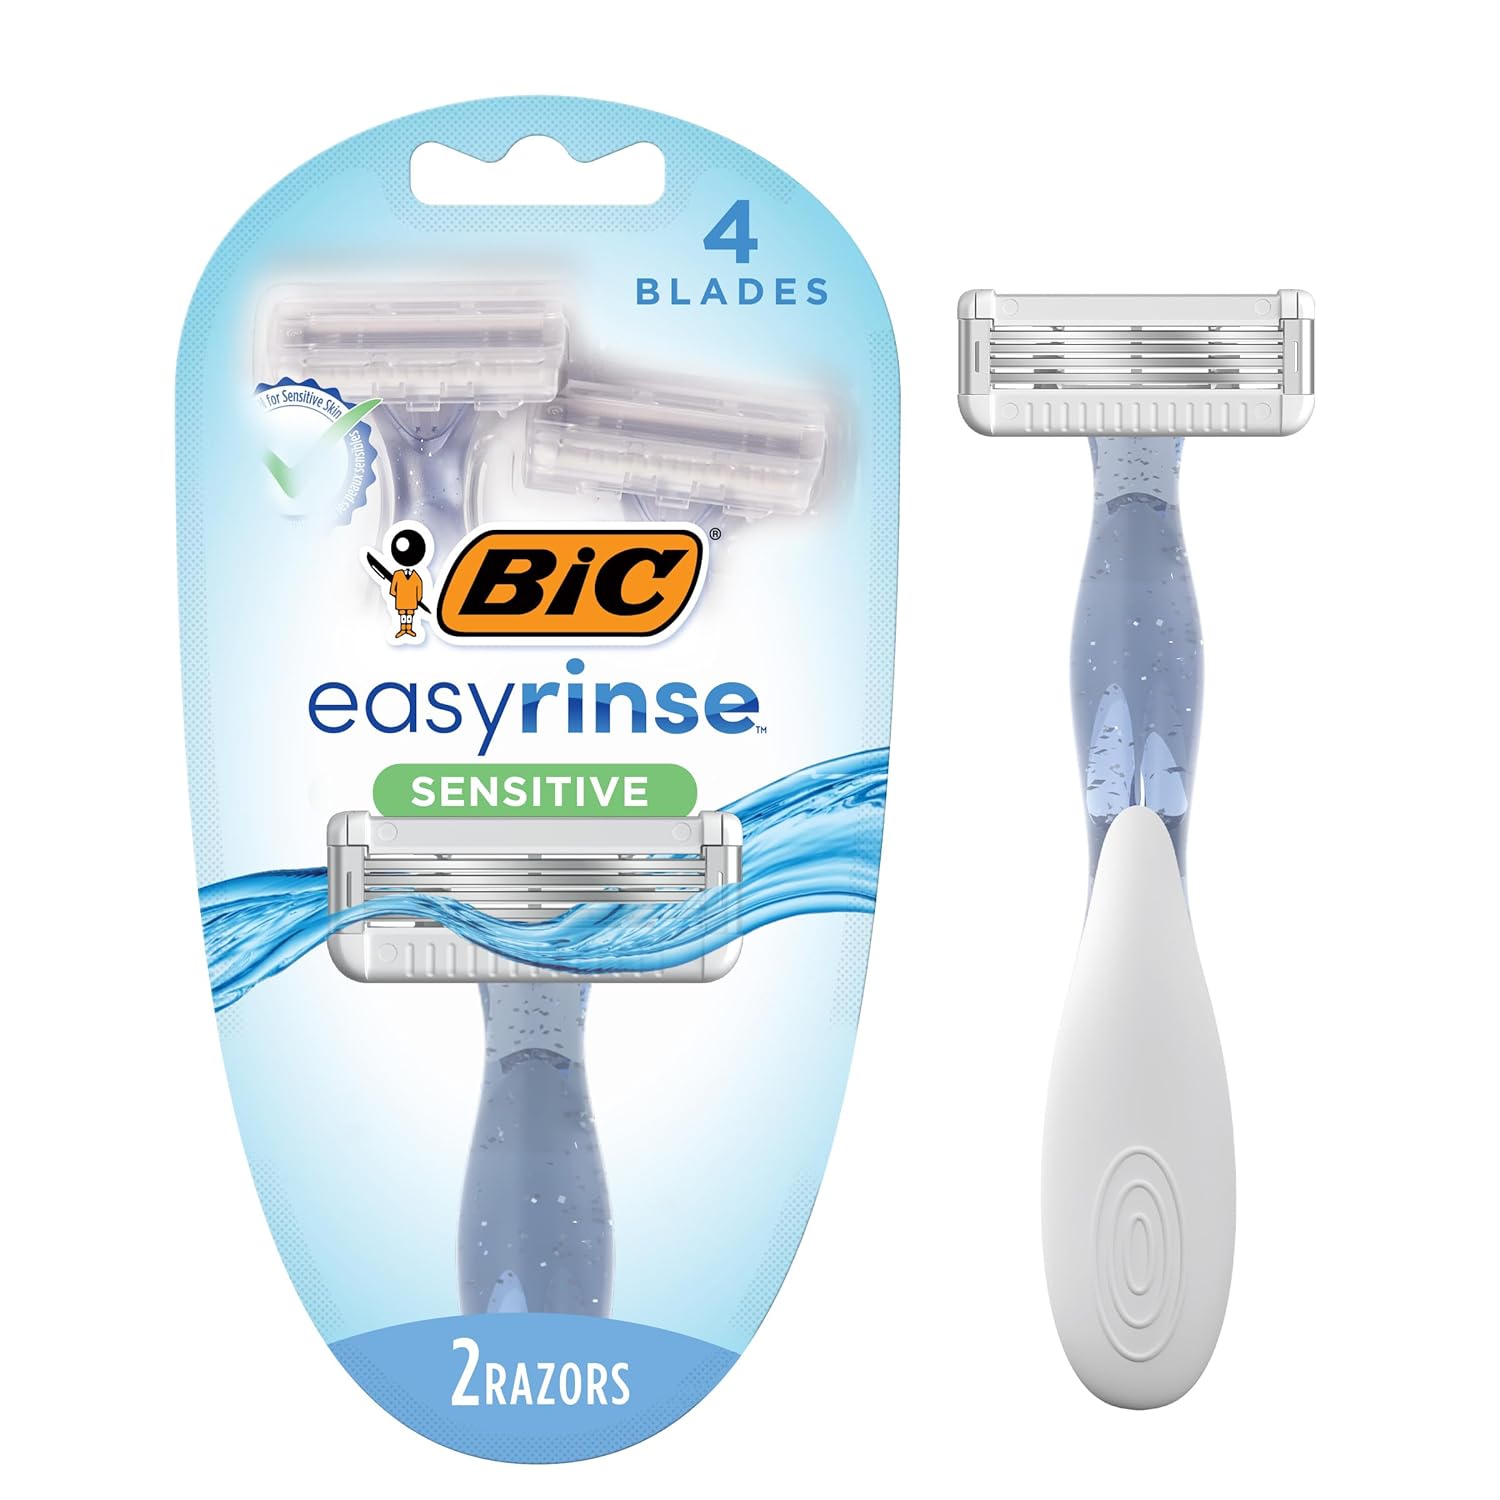 My skin is very sensitive and I have lots of skin allergies like fragrance, Lysol, exfoliants, etc. I have tried just about every budget razor that you can find in the grocery store, at Target, or at CVS. Now, I just order these from Amazon, especially if I cannot find them right away in store.These are the only razors that NEVER leave me with bumps, irritation, rashes, or extreme dryness. There is absolutely nothing fancy about these razors in terms of the actual shave. It is a pretty standard close shave. However, the fact that my skin is free from imperfection afterward is something I can't put a price on. Excellent budget razor for sensitive skin